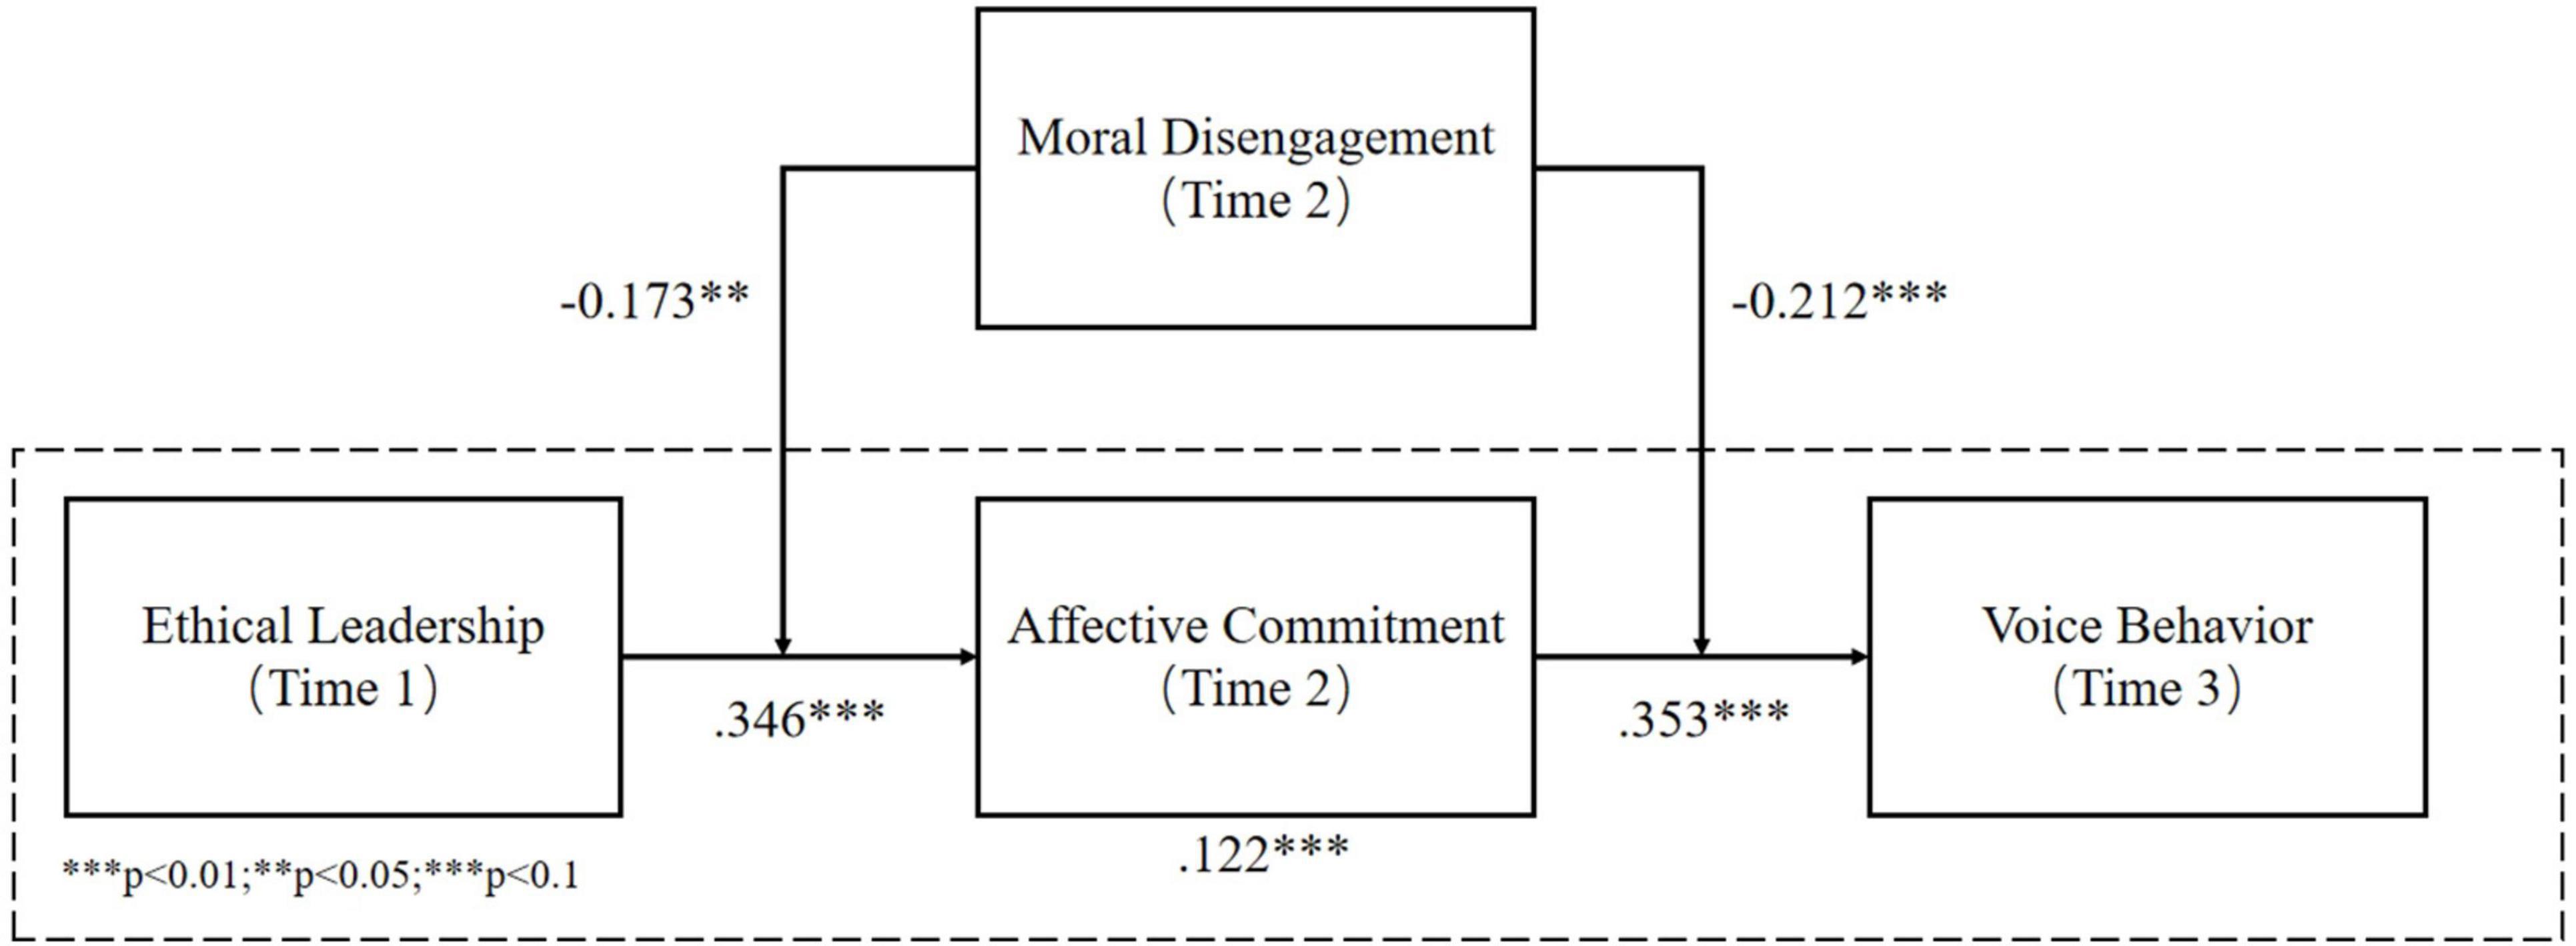 Frontiers How Ethical Leadership Prompts Employees Voice Behavior? The Roles of Employees Affective Commitment and Moral Disengagement